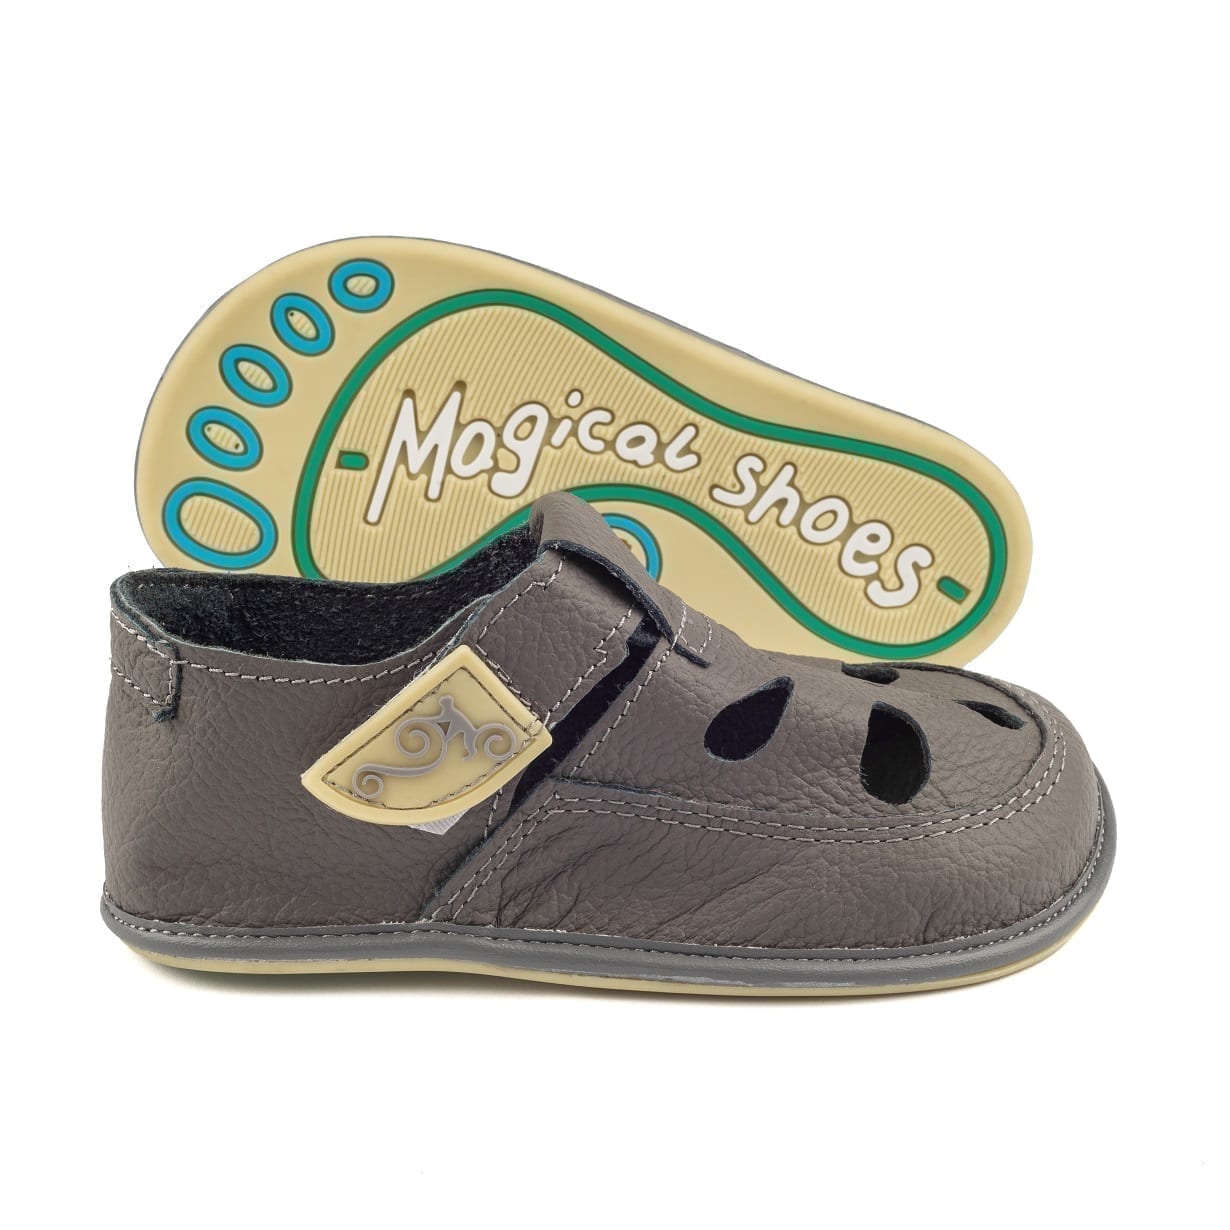 Coco Barefoot Shoes for Kids